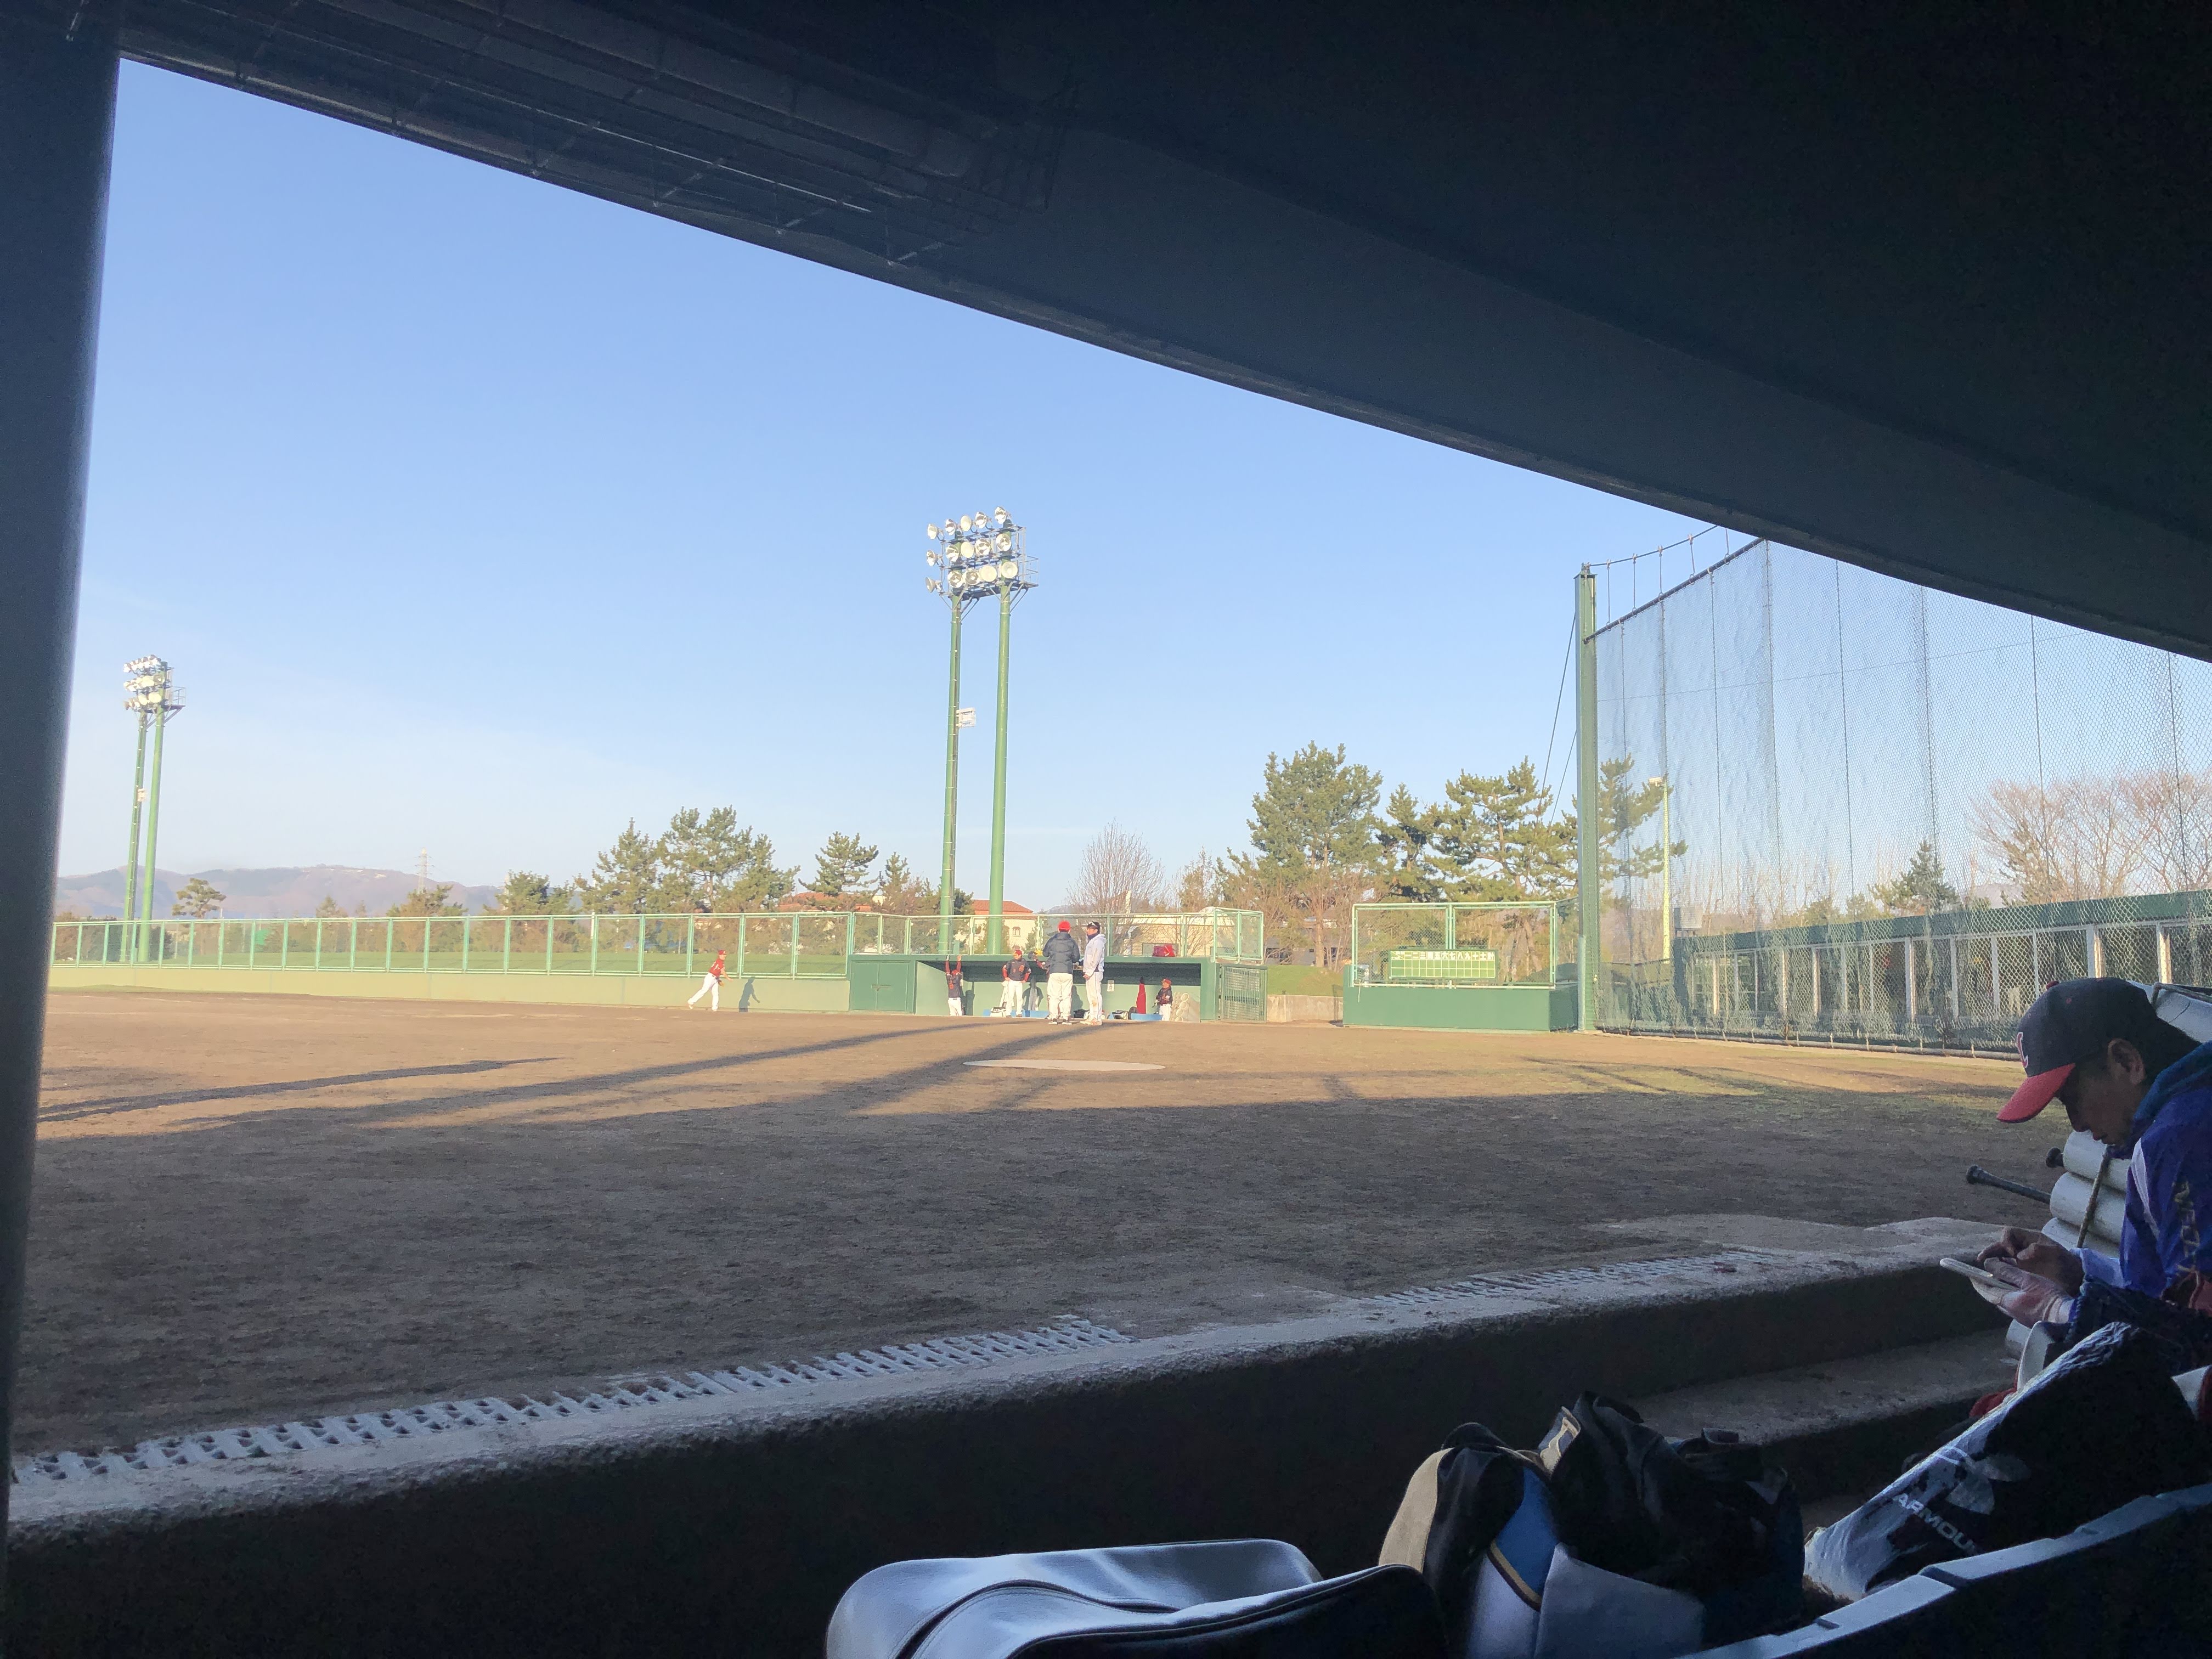 Staring down the other team from the dugout (Tsuyoshi and I would get traded before the game so I have mixed feelings about glaring at them before that event)